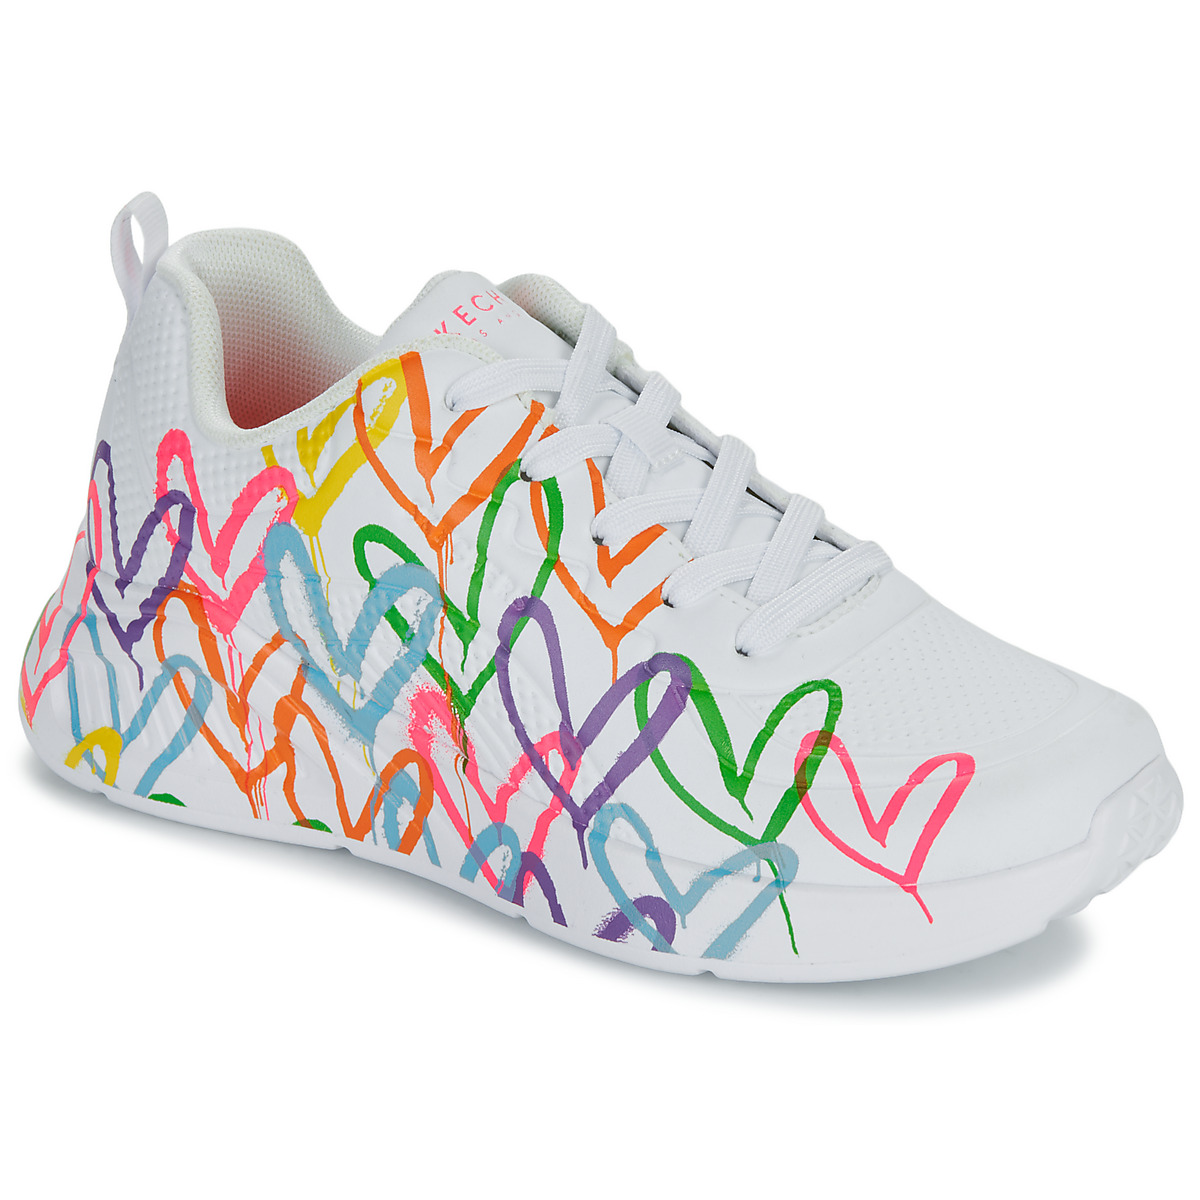 Skechers Uno Lite Goldcrown - Heart Of Hearts White